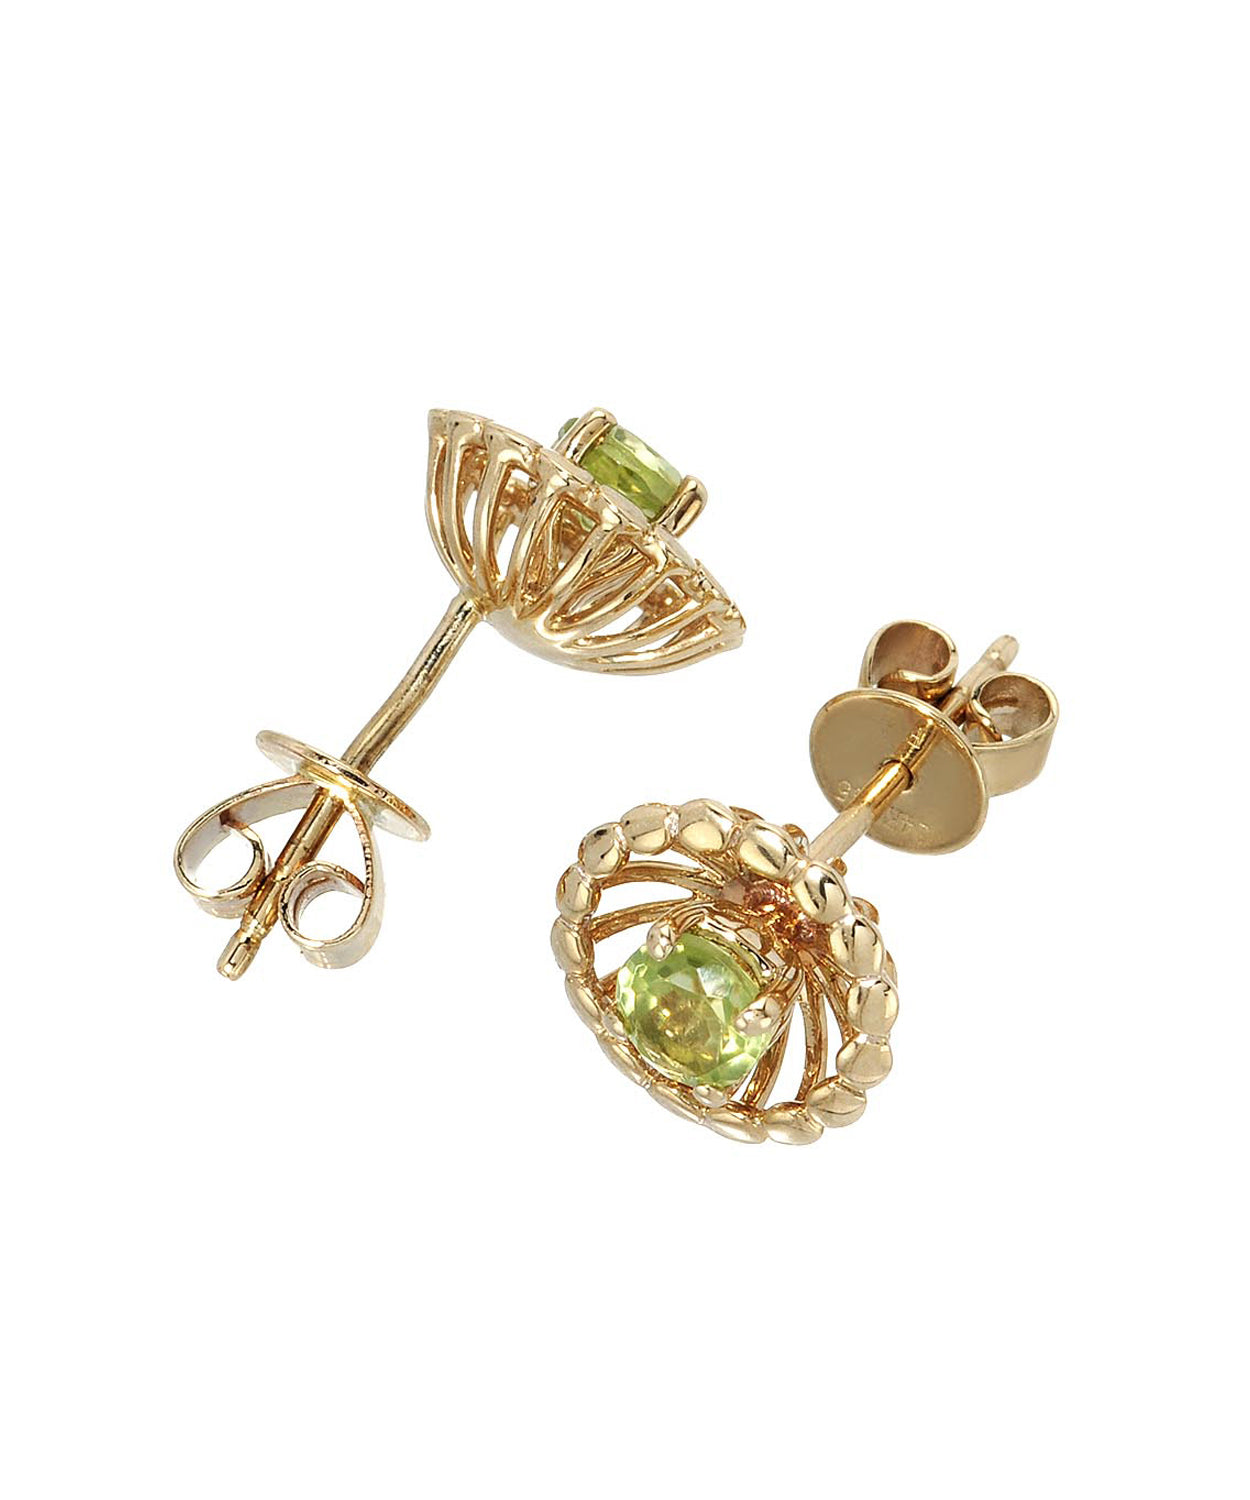 0.56 ctw Natural Lime Peridot 14k Yellow Gold Stud Earrings View 2